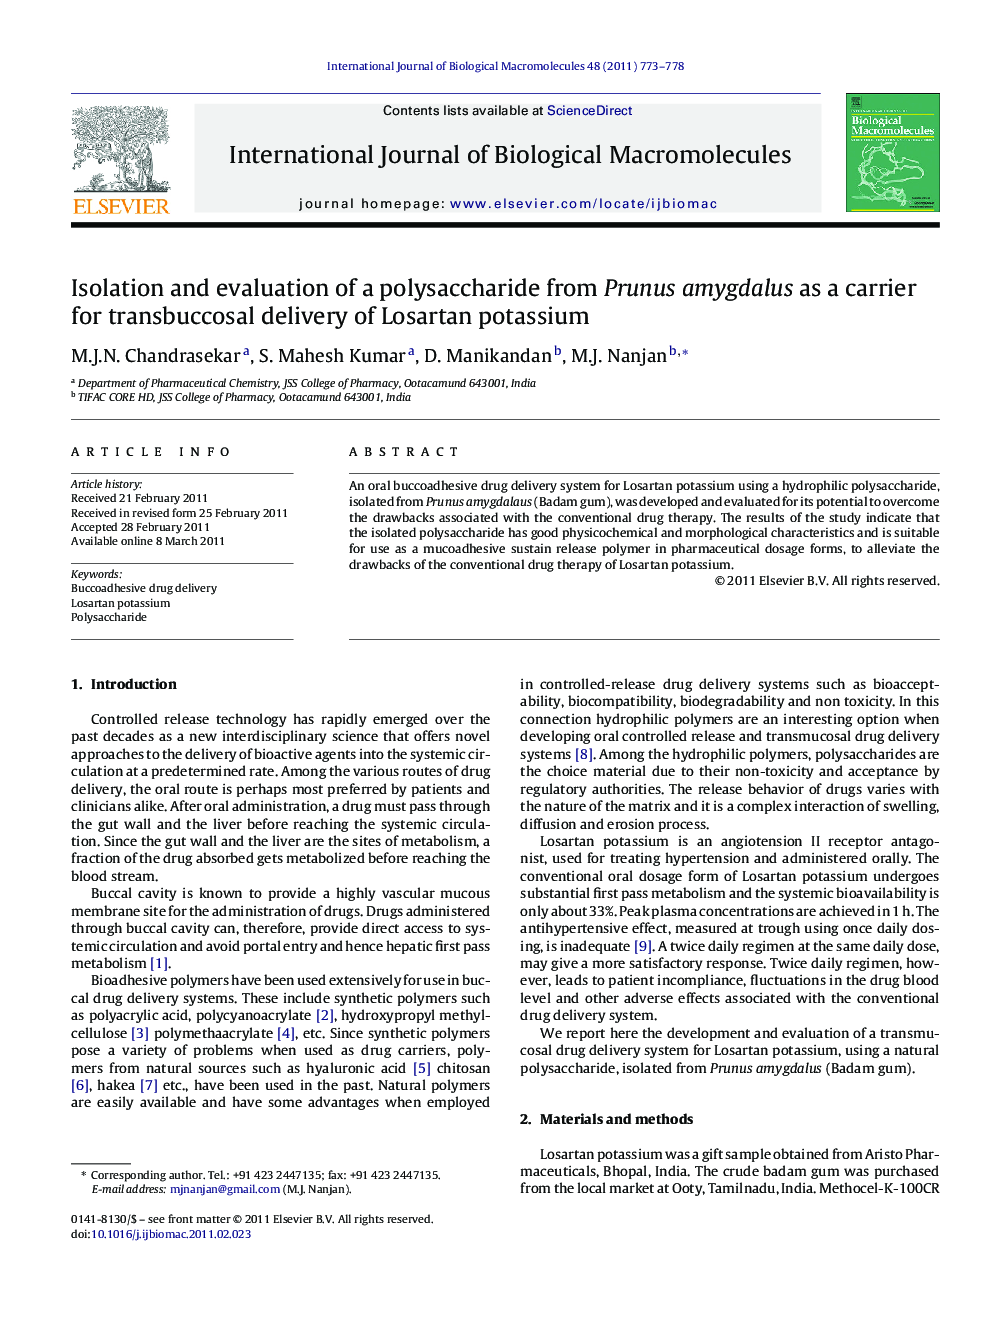 Isolation and evaluation of a polysaccharide from Prunus amygdalus as a carrier for transbuccosal delivery of Losartan potassium